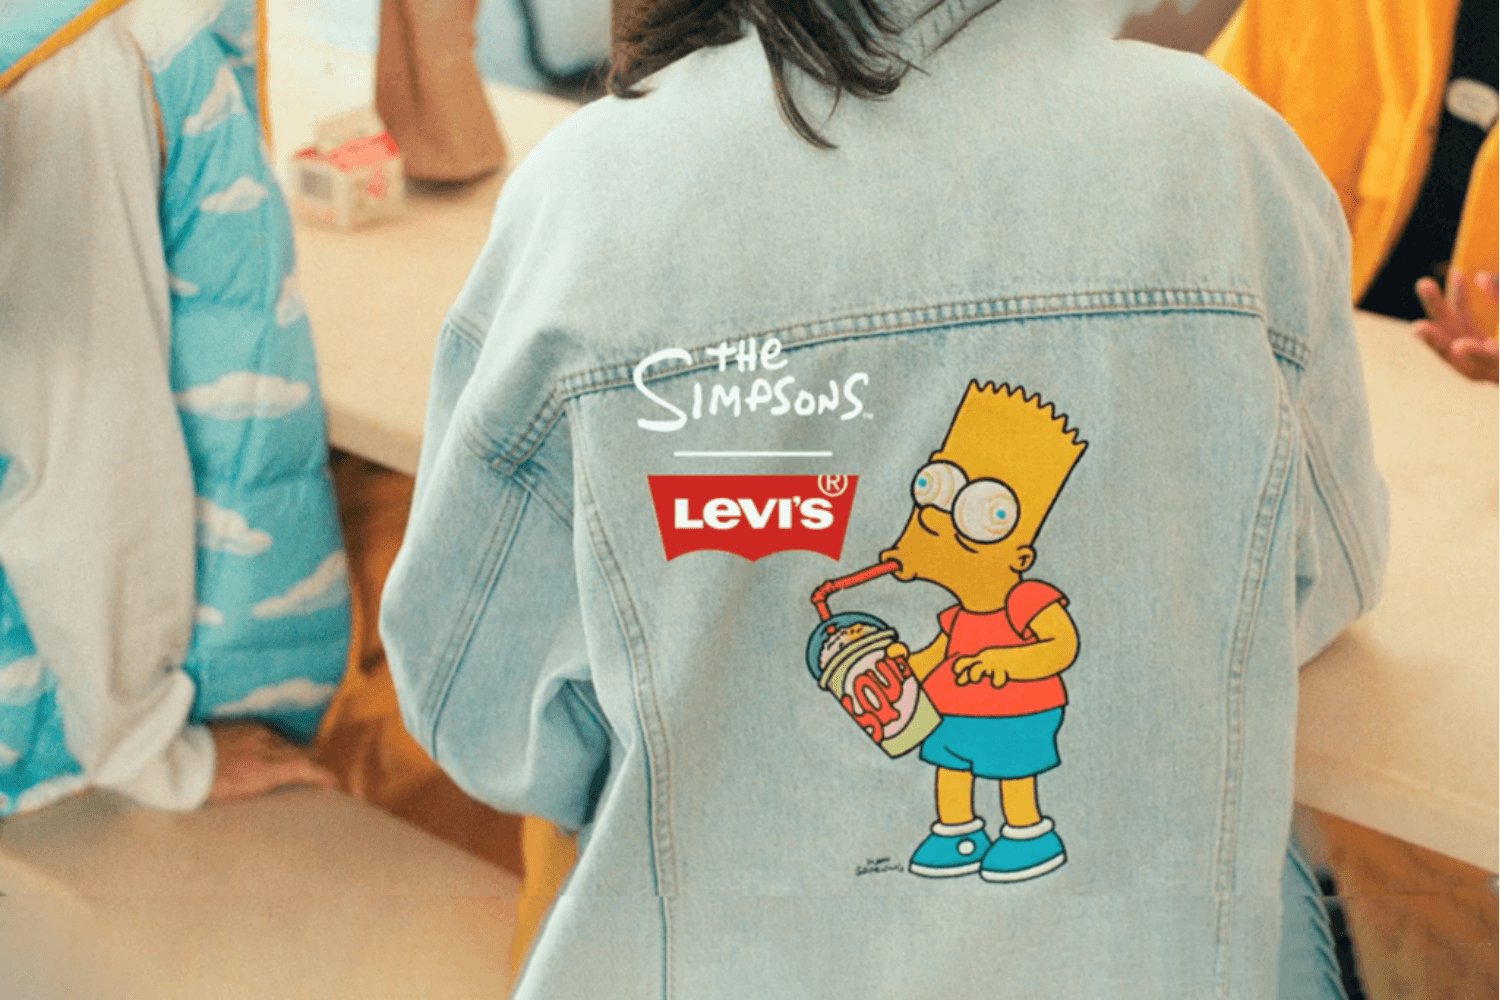 The Levi's x The Simpsons collaboration